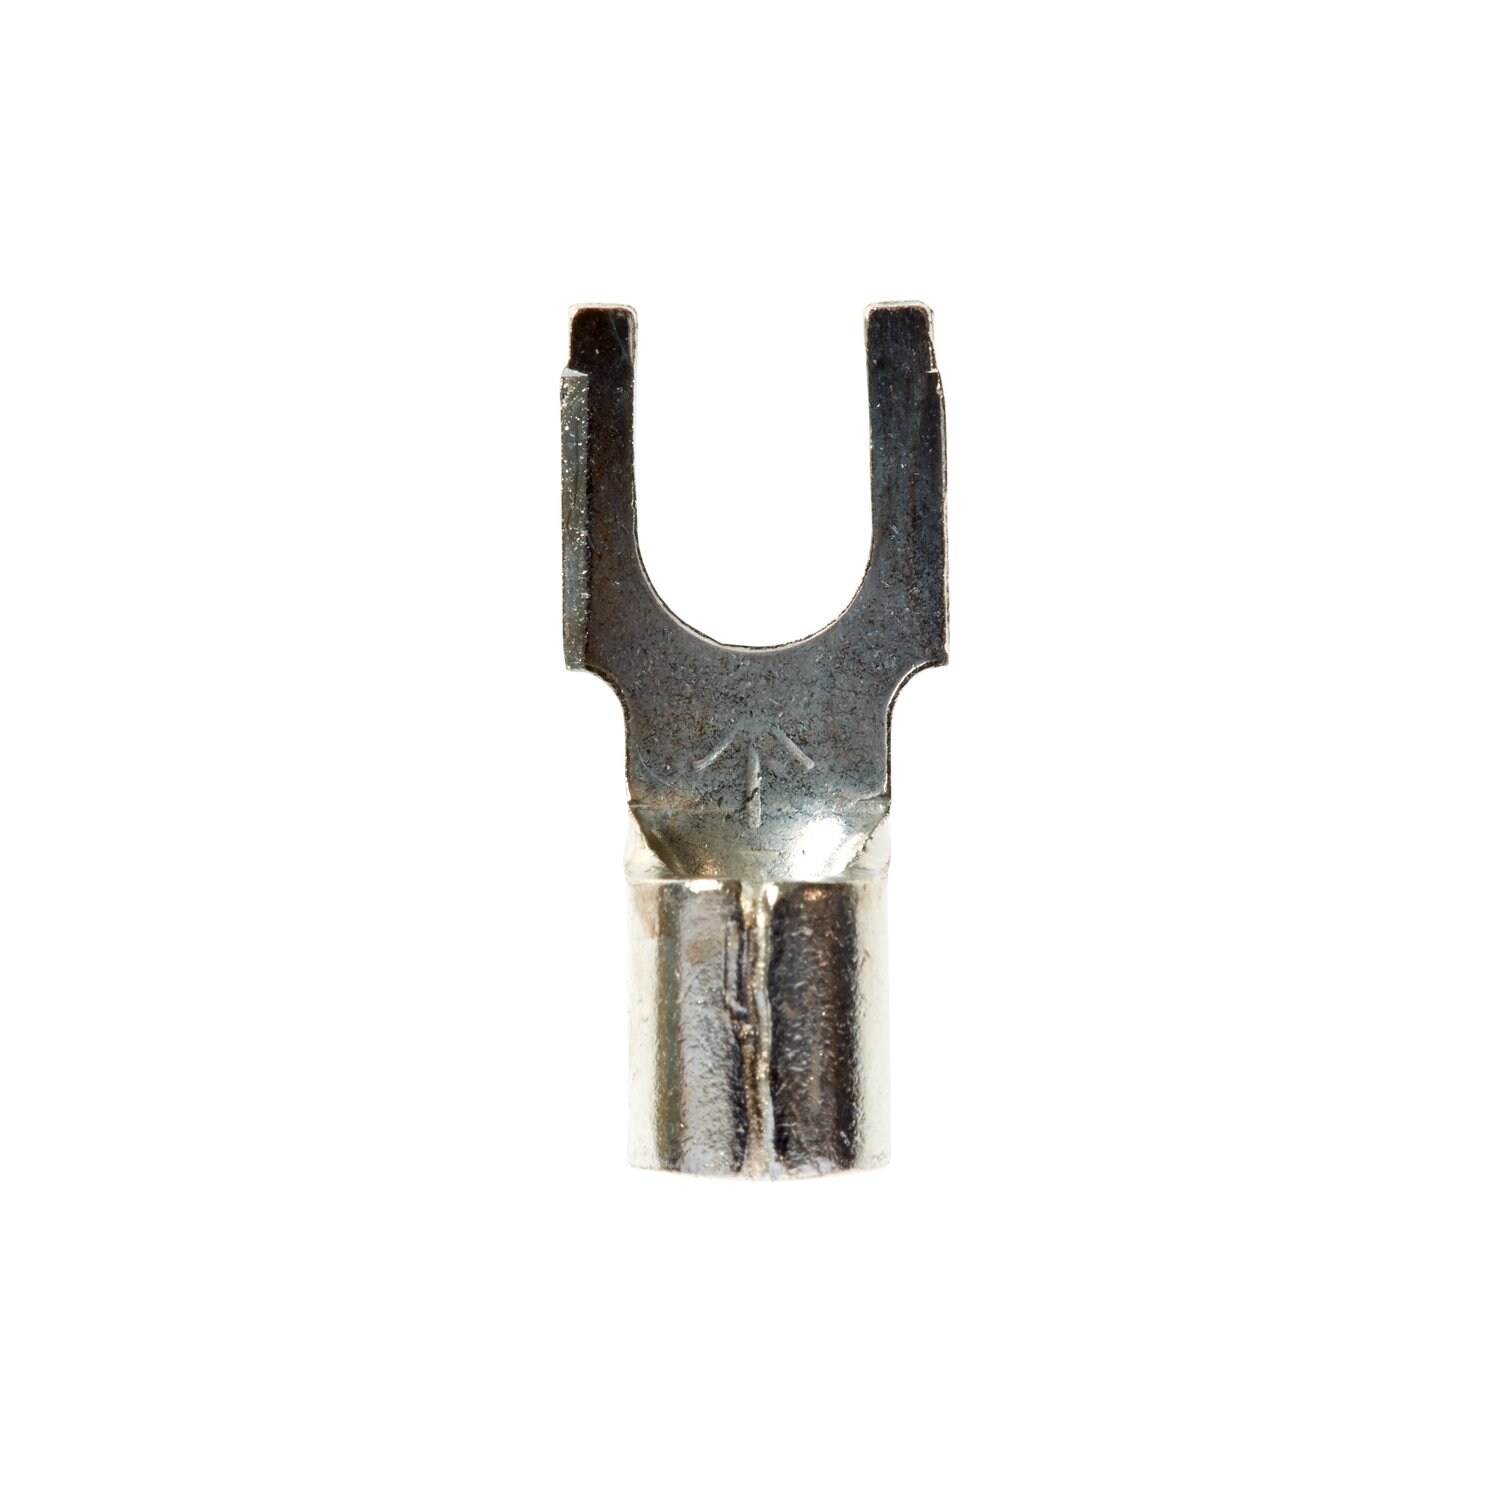 7100164112 - 3M Scotchlok Block Fork, Non-Insulated Brazed Seam M10-10FBK, Stud
Size 10, suitable for use in a terminal block, 500/Case